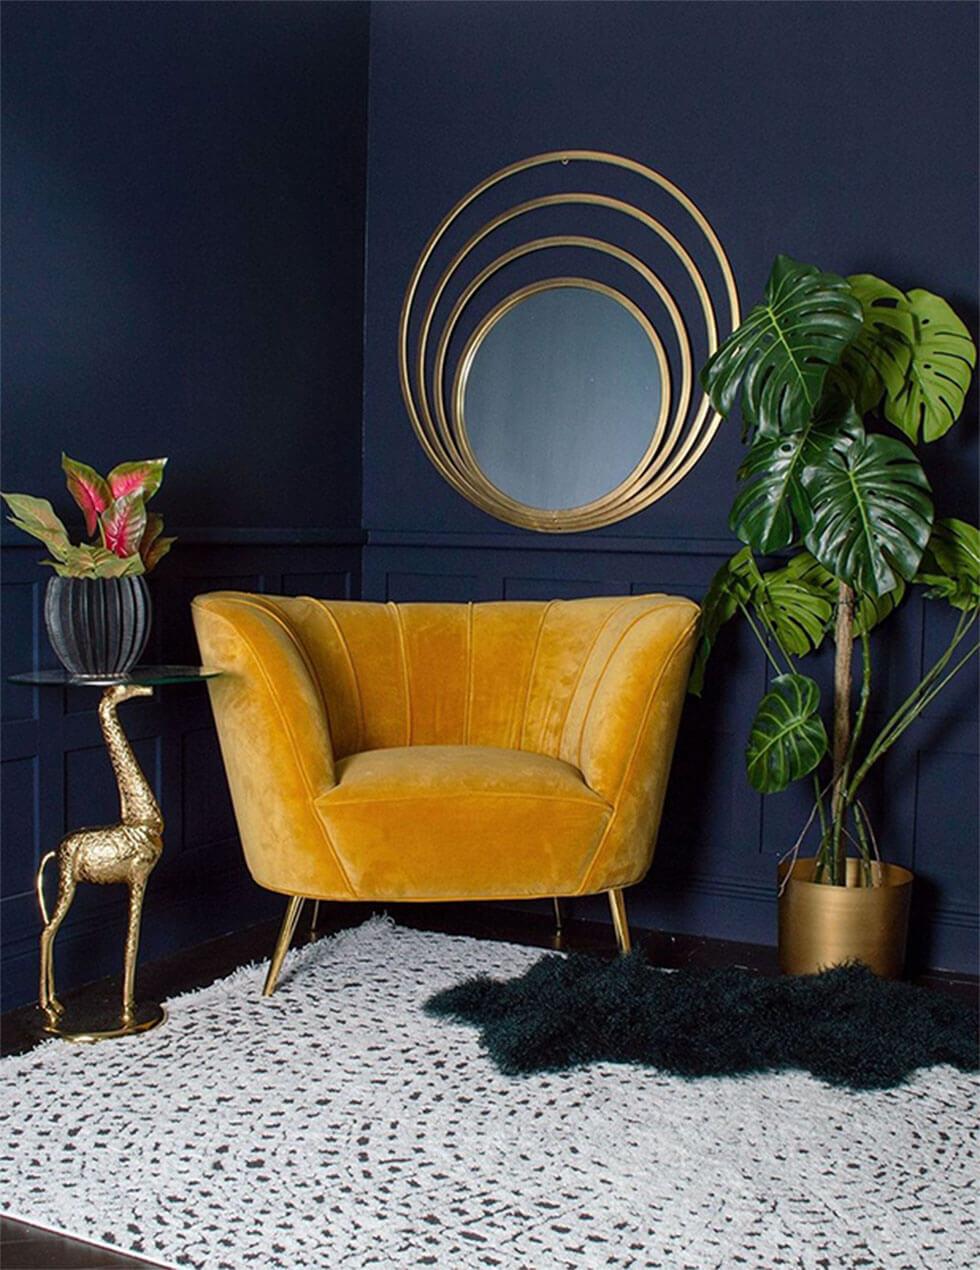 Mustard armchair and gold framed mirror in a deep sapphire blue room